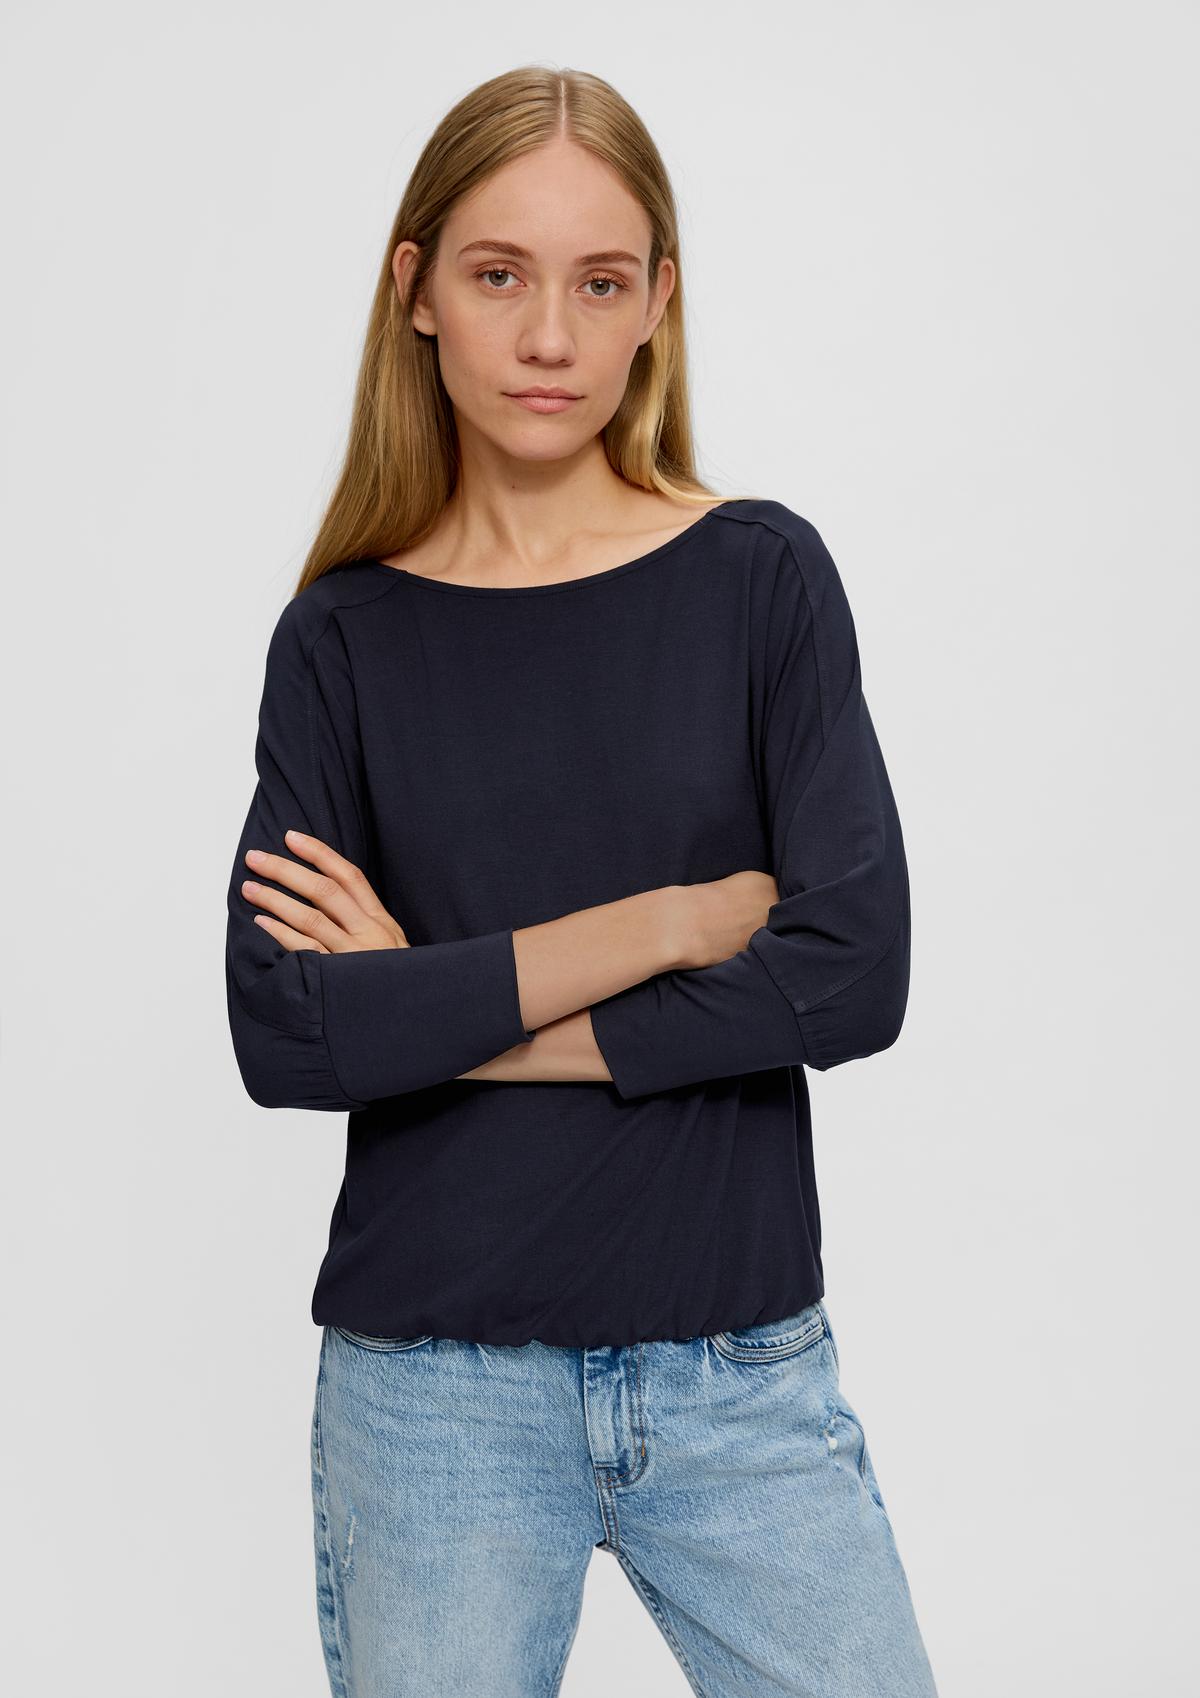 viscose sleeve Long top stretch navy in -